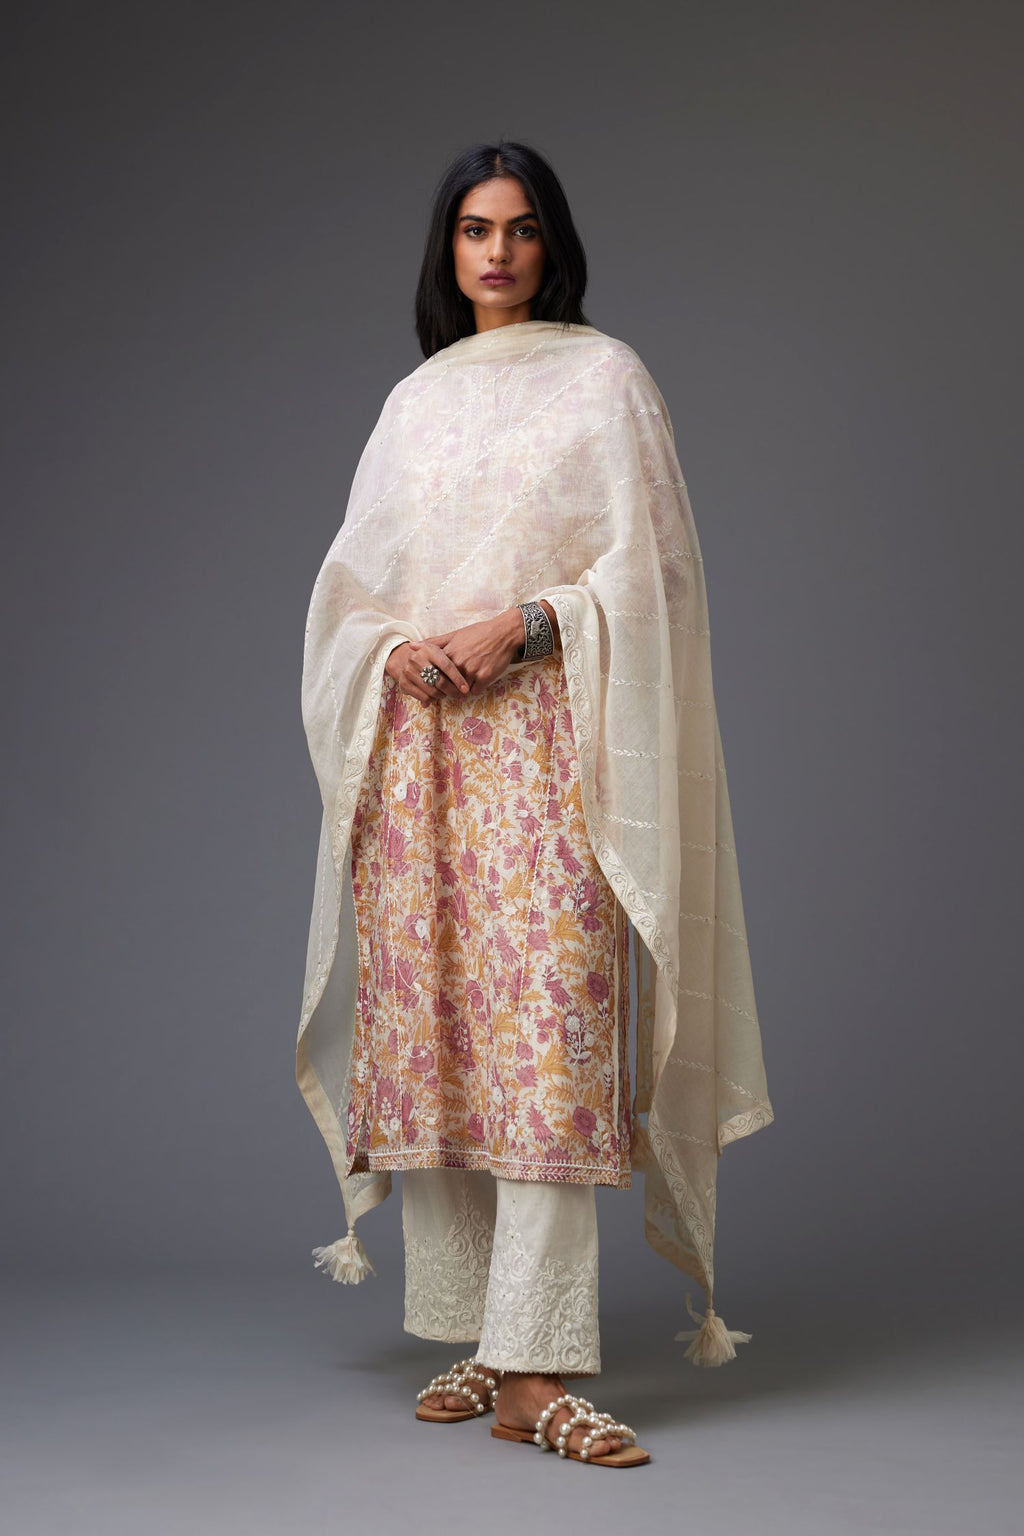 Off-white cotton chanderi dupatta with dori embroidery border at the edges and diagonal thread embroidered lines all-over the dupatta.